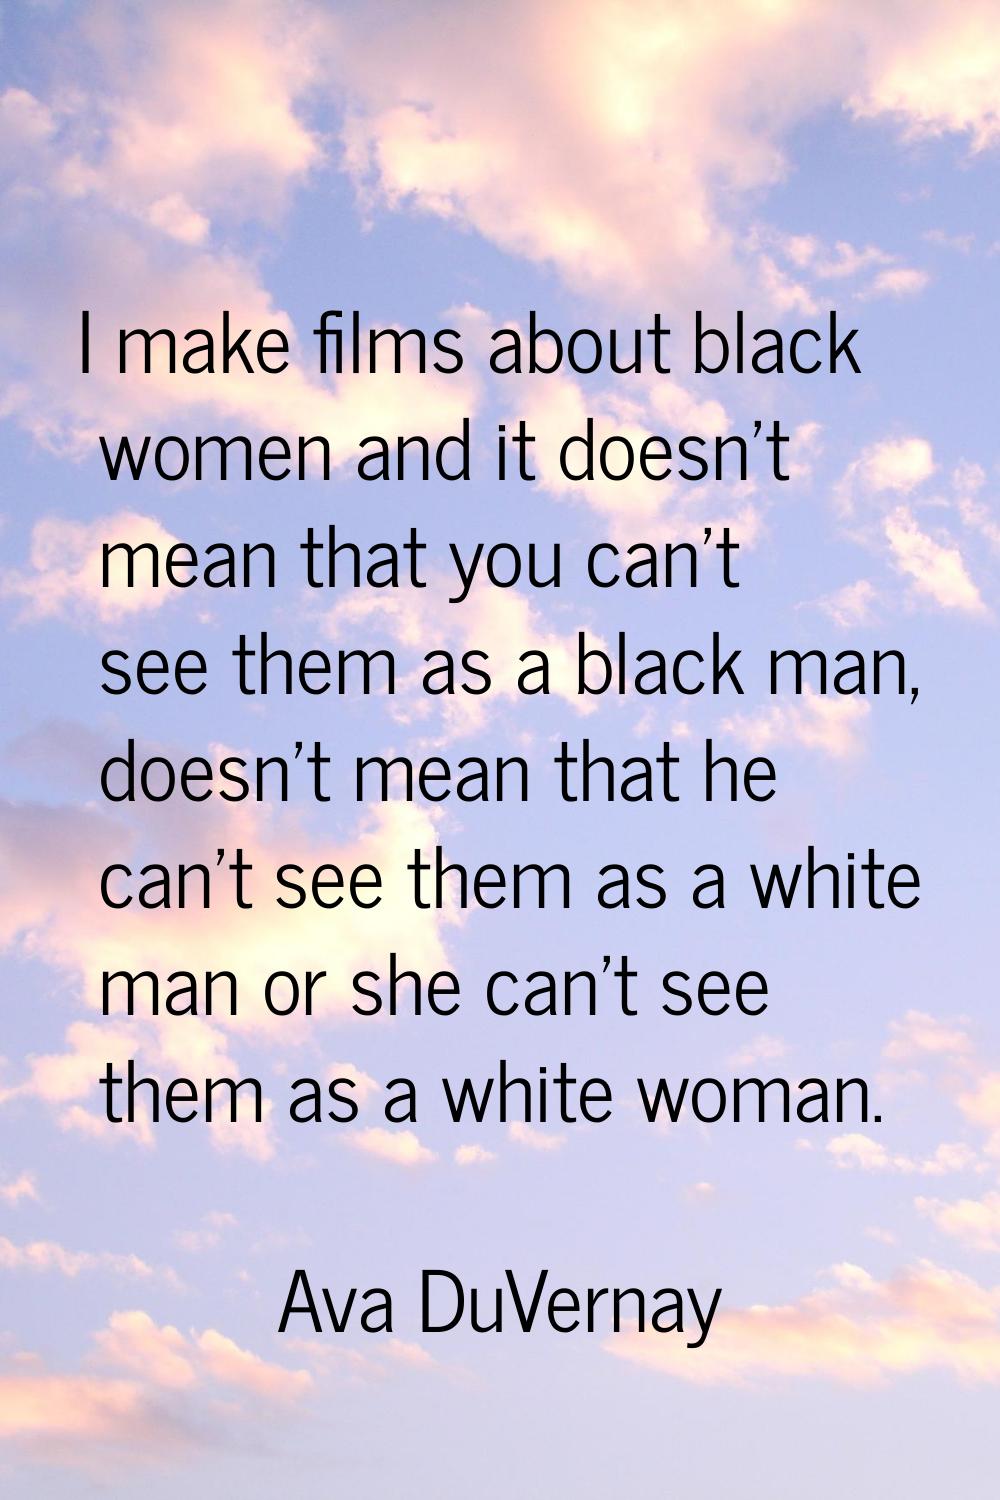 I make films about black women and it doesn't mean that you can't see them as a black man, doesn't 